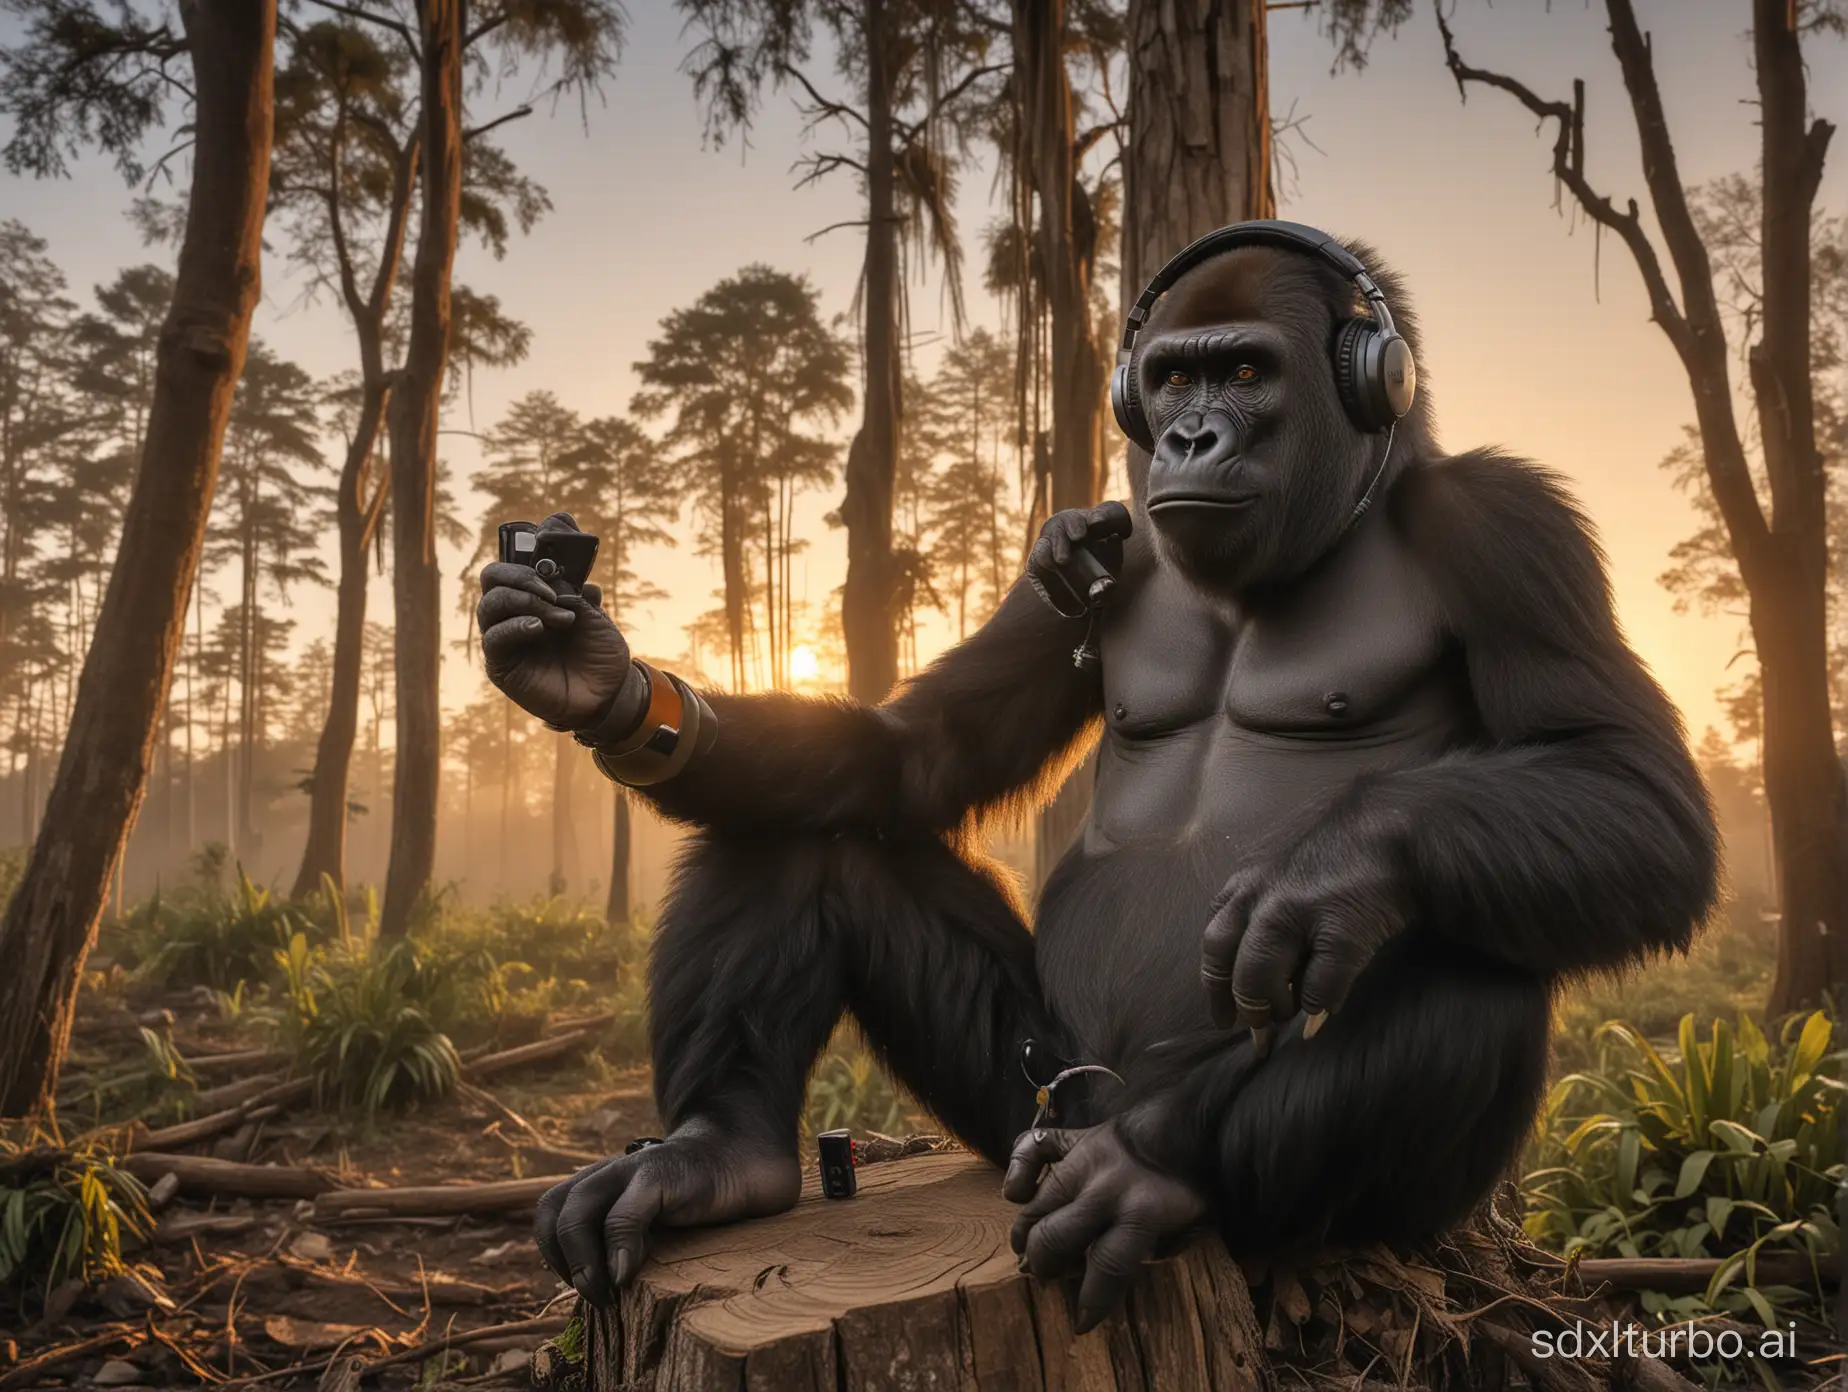 Portrait of a gorilla,sitting on a tree stump, holding a Walkman and wearing headphones. The sun is setting on the left side of the image . Cinematic light and wide angle lens.